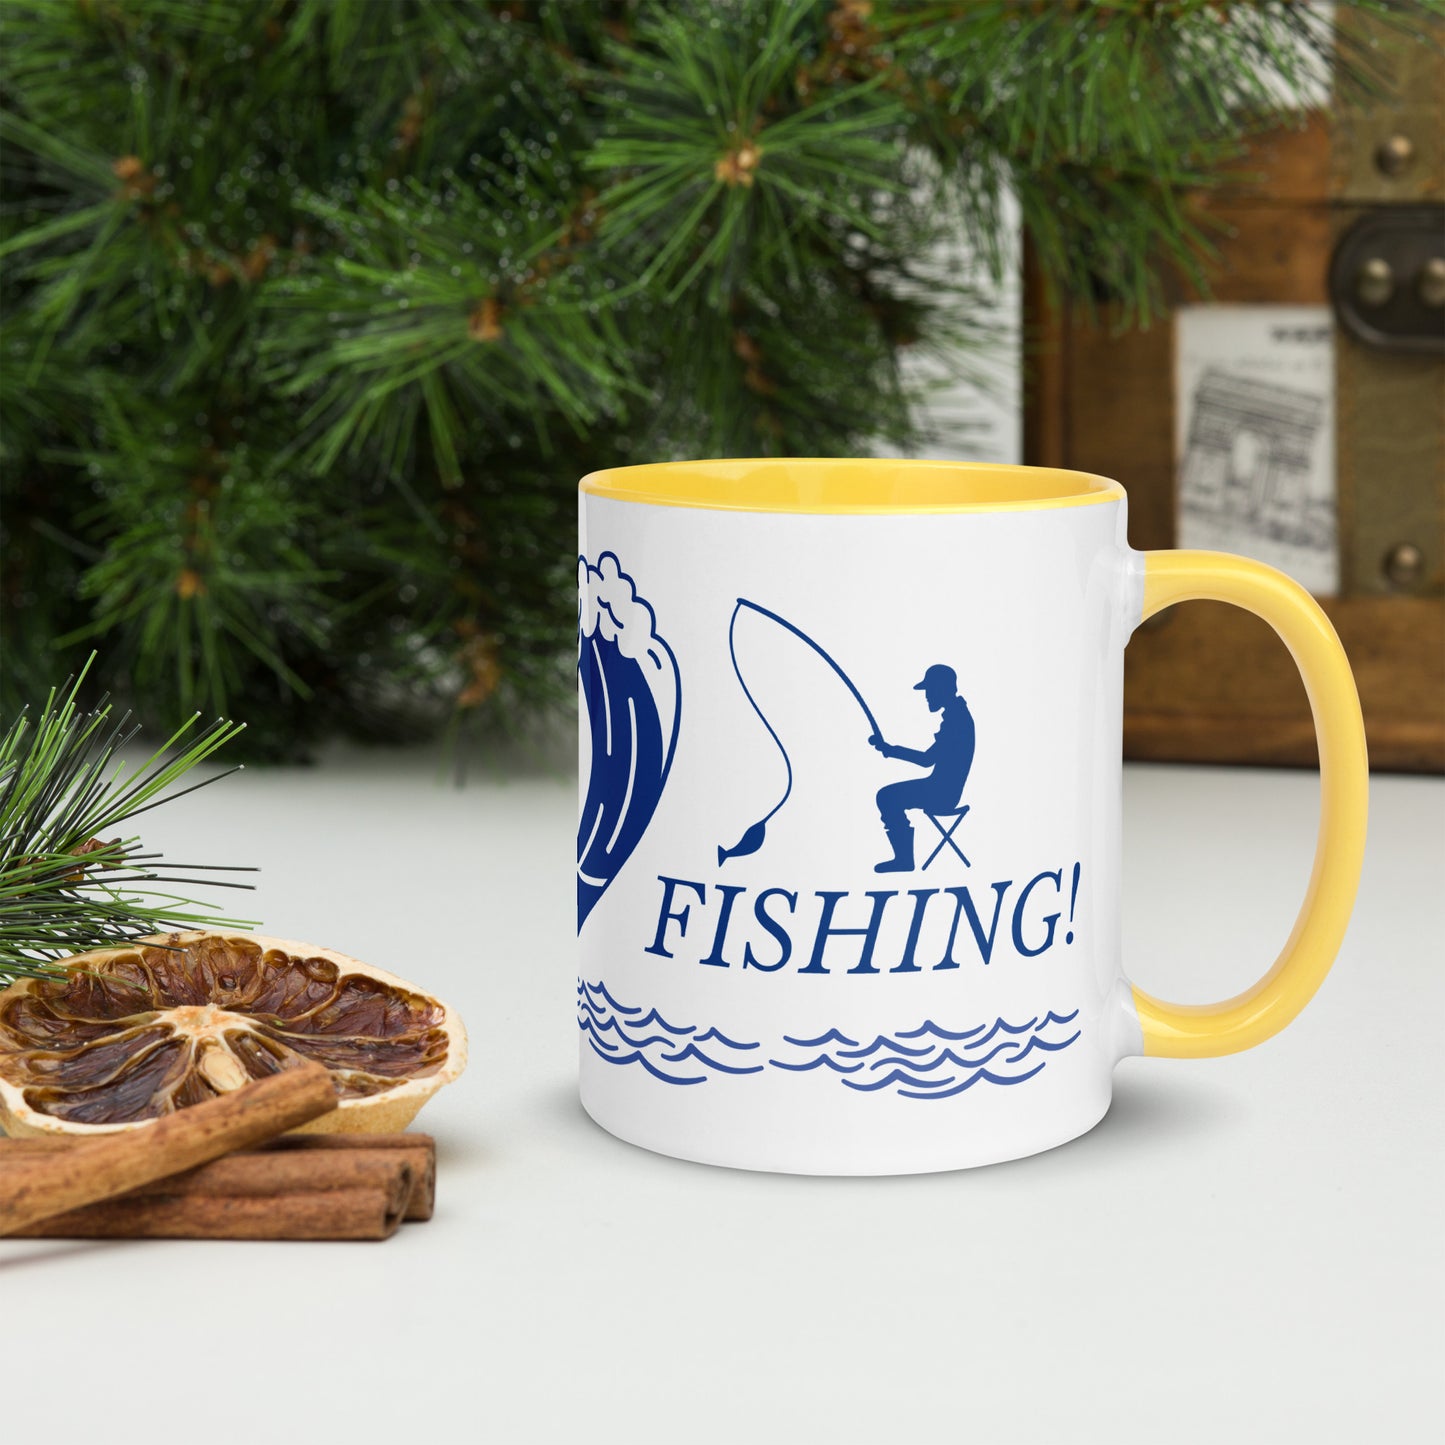 I Love Fishing Mug with Colour Inside by Our BoatyVerse